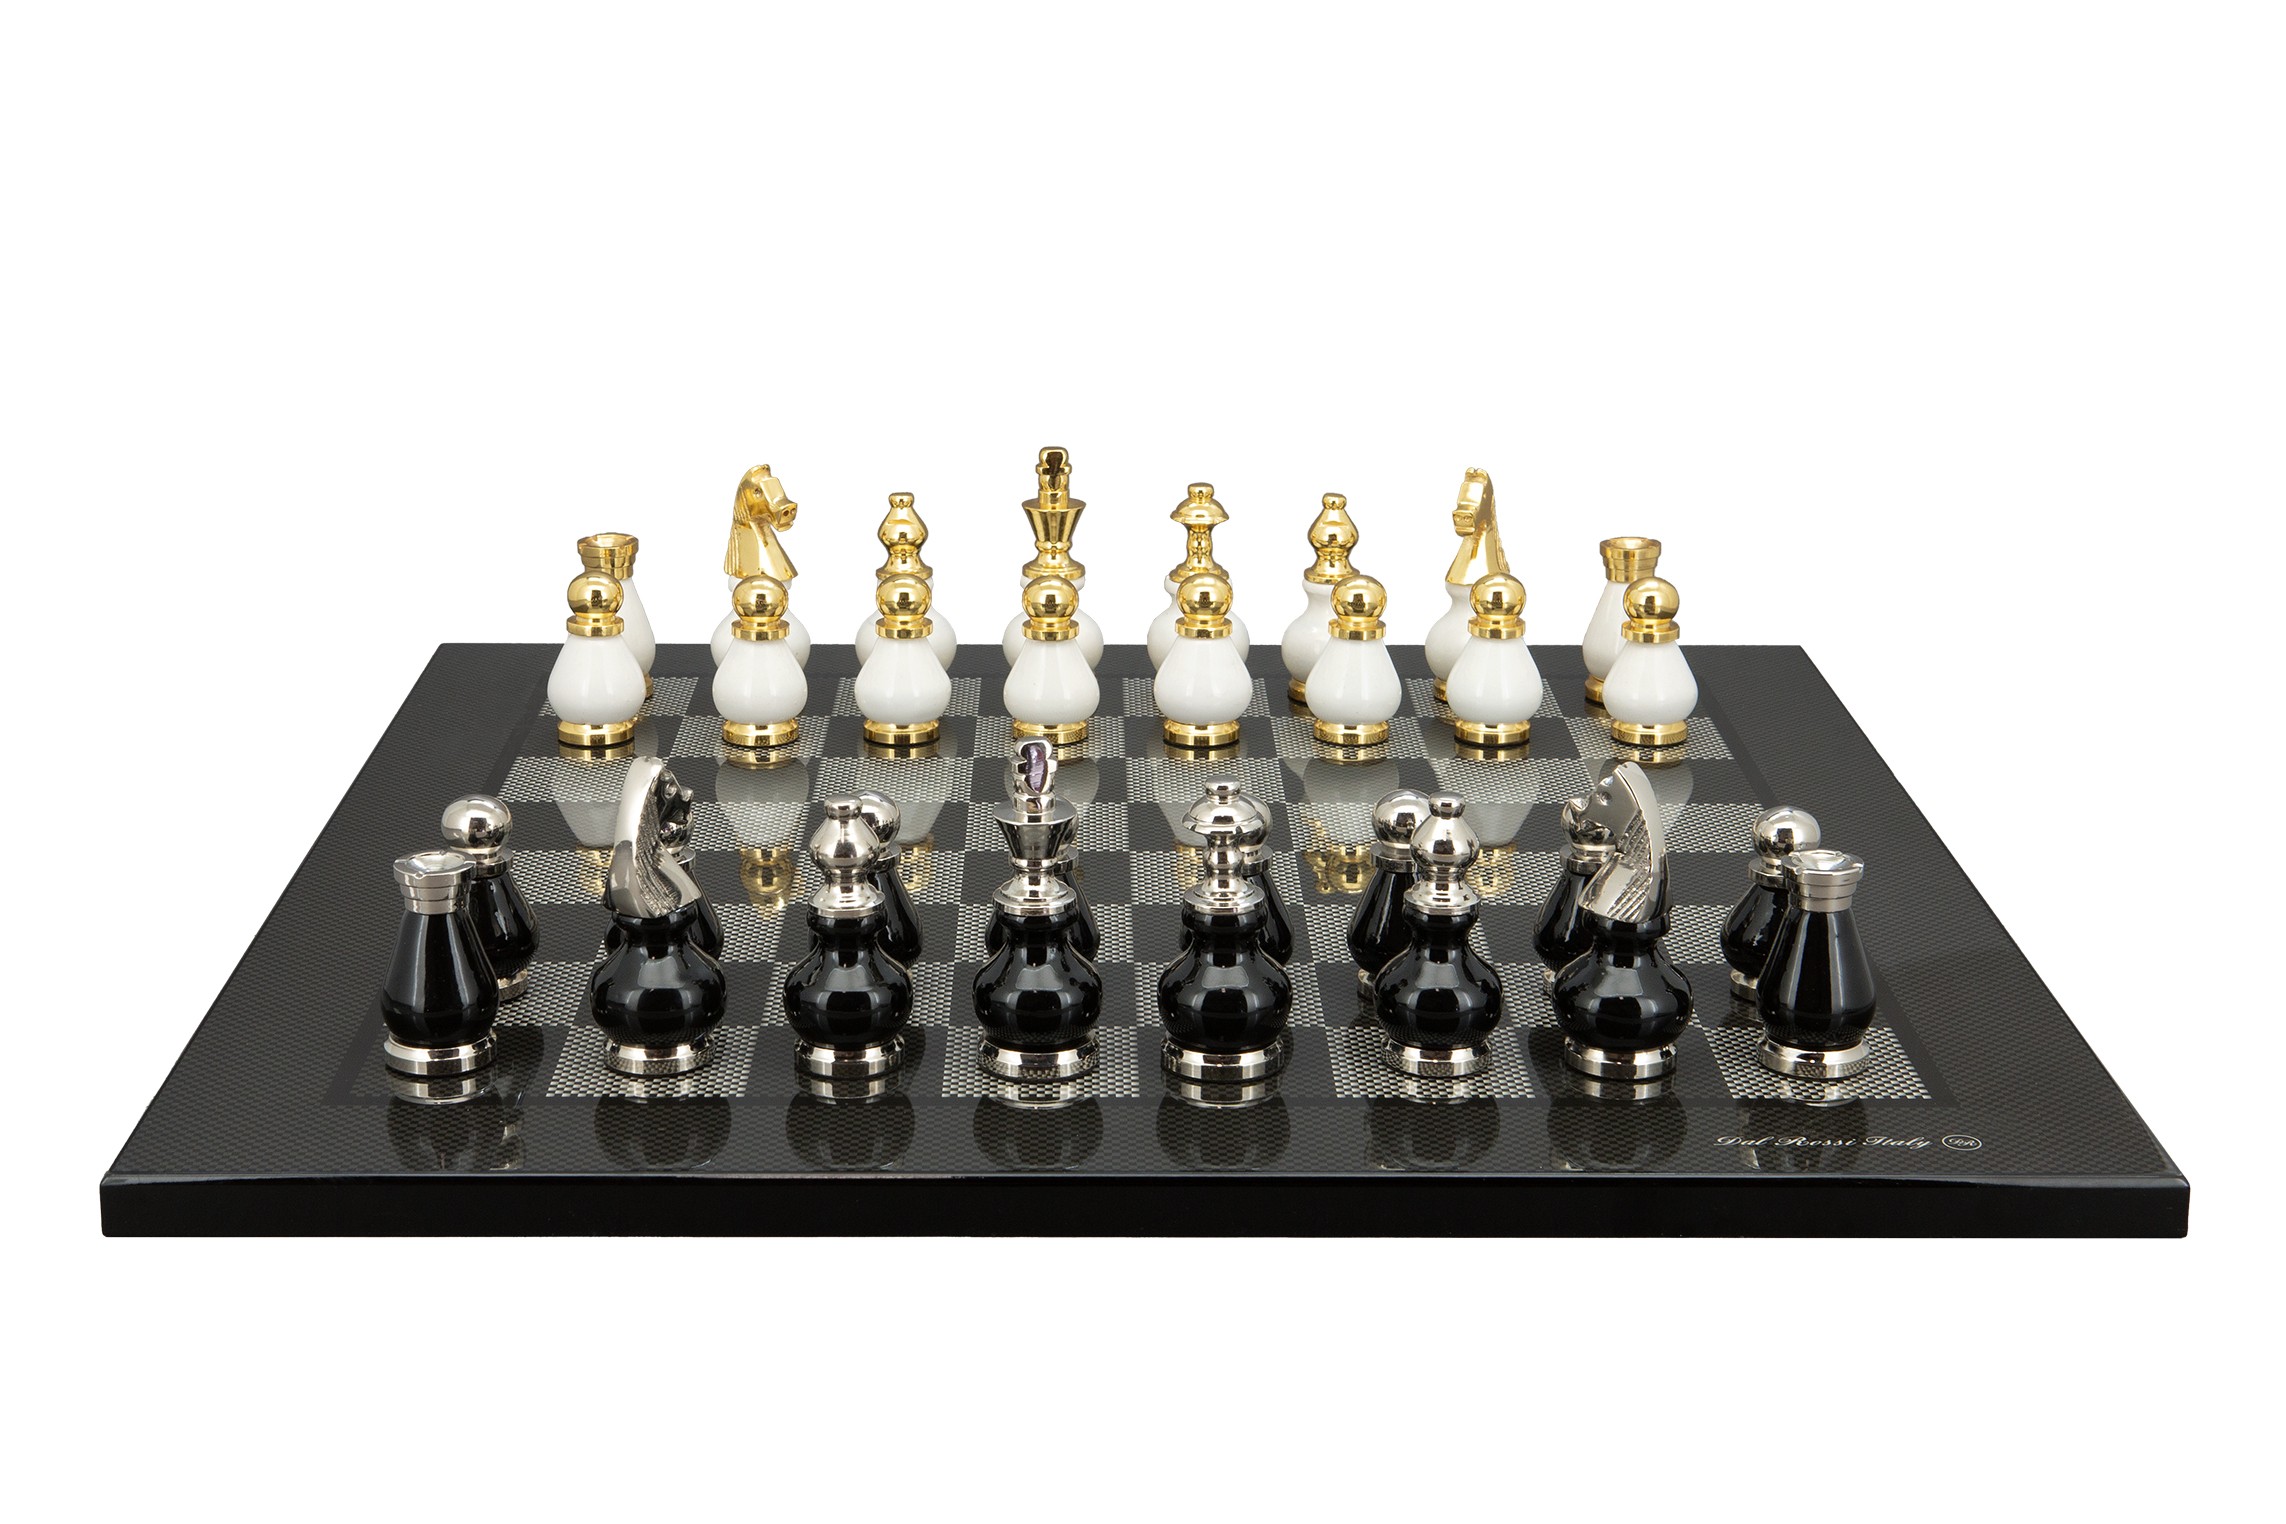 Dal Rossi Italy, Black and White with Gold and Silver Tops and Bottoms Chessmen 90mm on a Carbon Fibre Shiny Finish, 50cm Chess Board